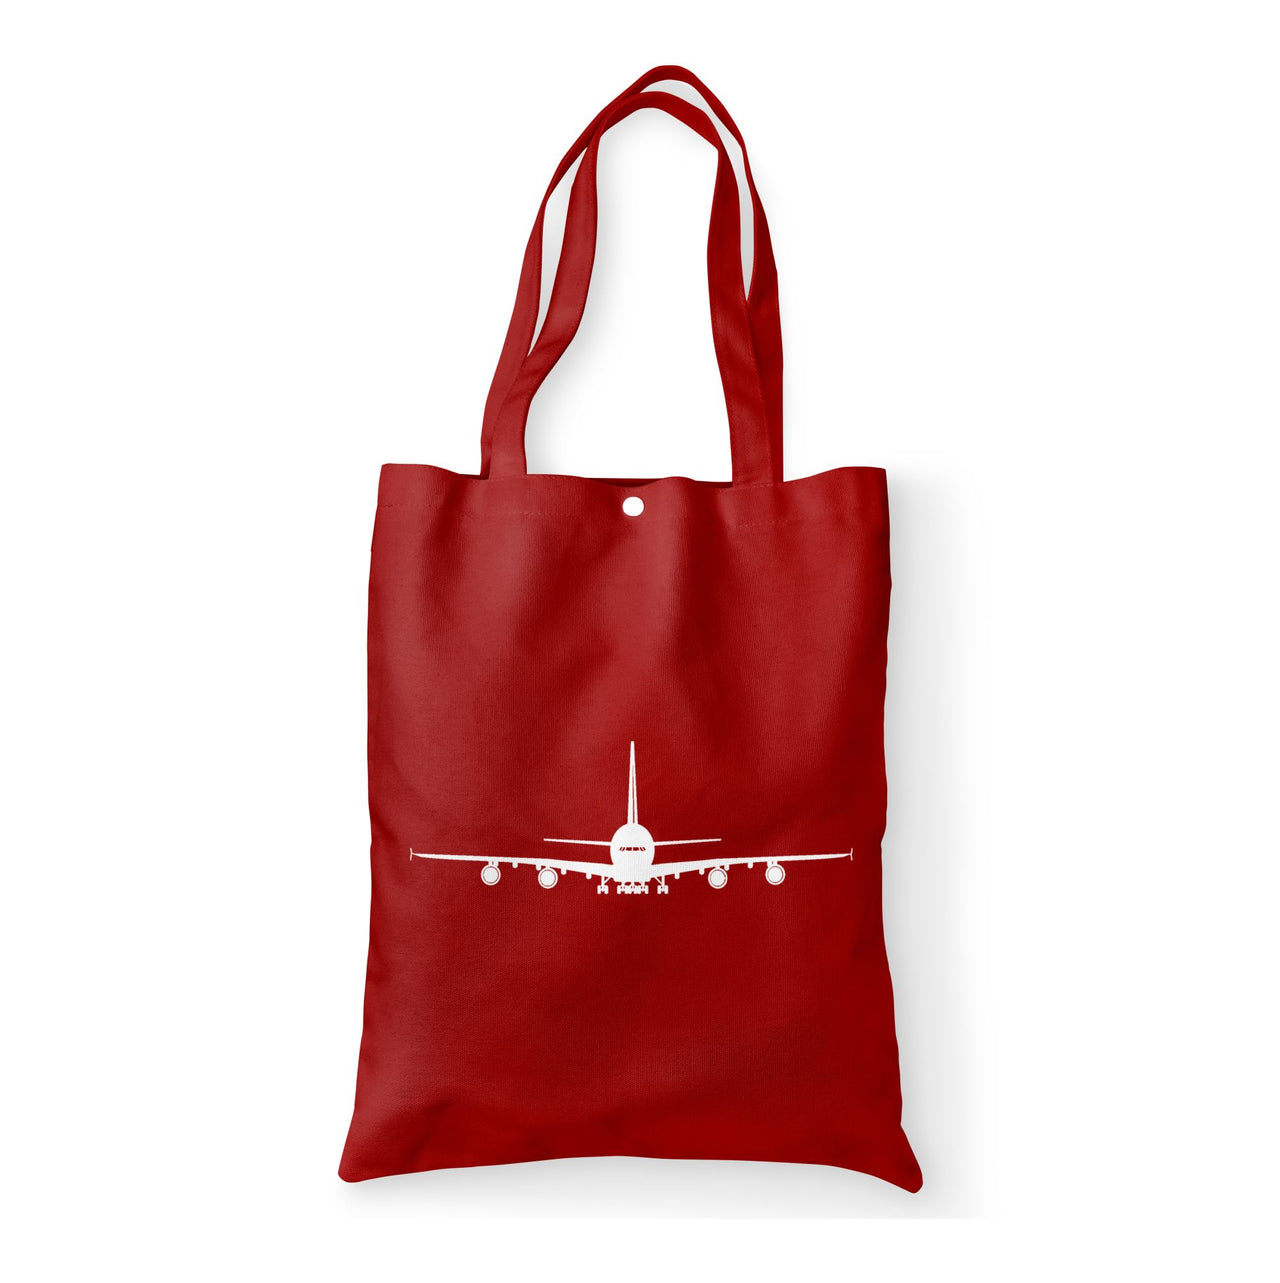 Airbus A380 Silhouette Designed Tote Bags